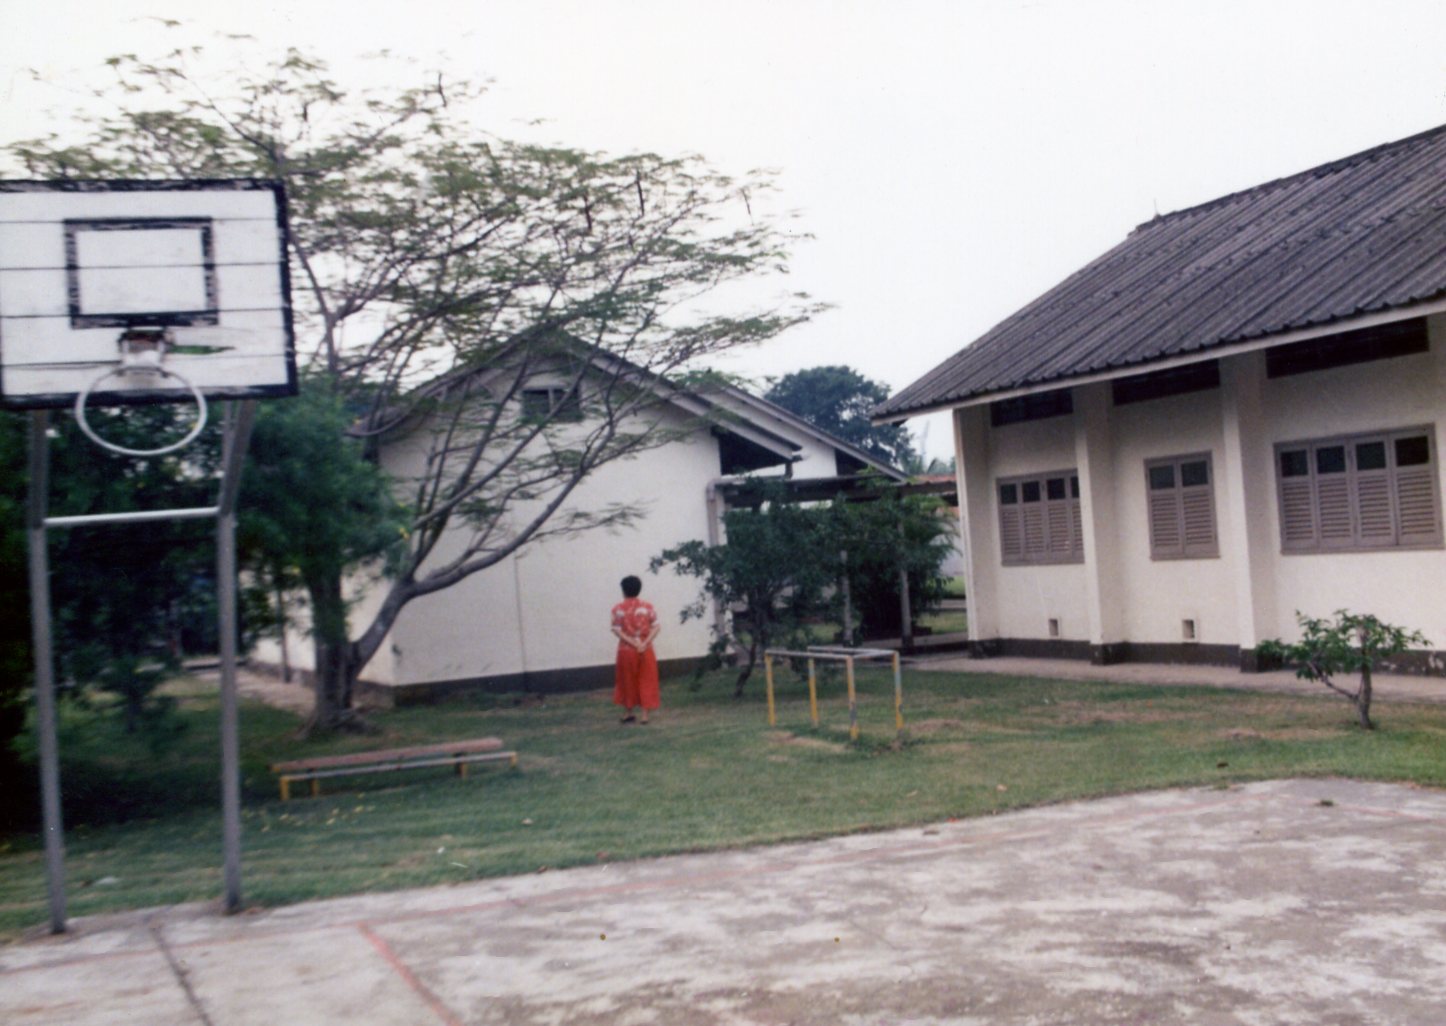 A Part of the School Building